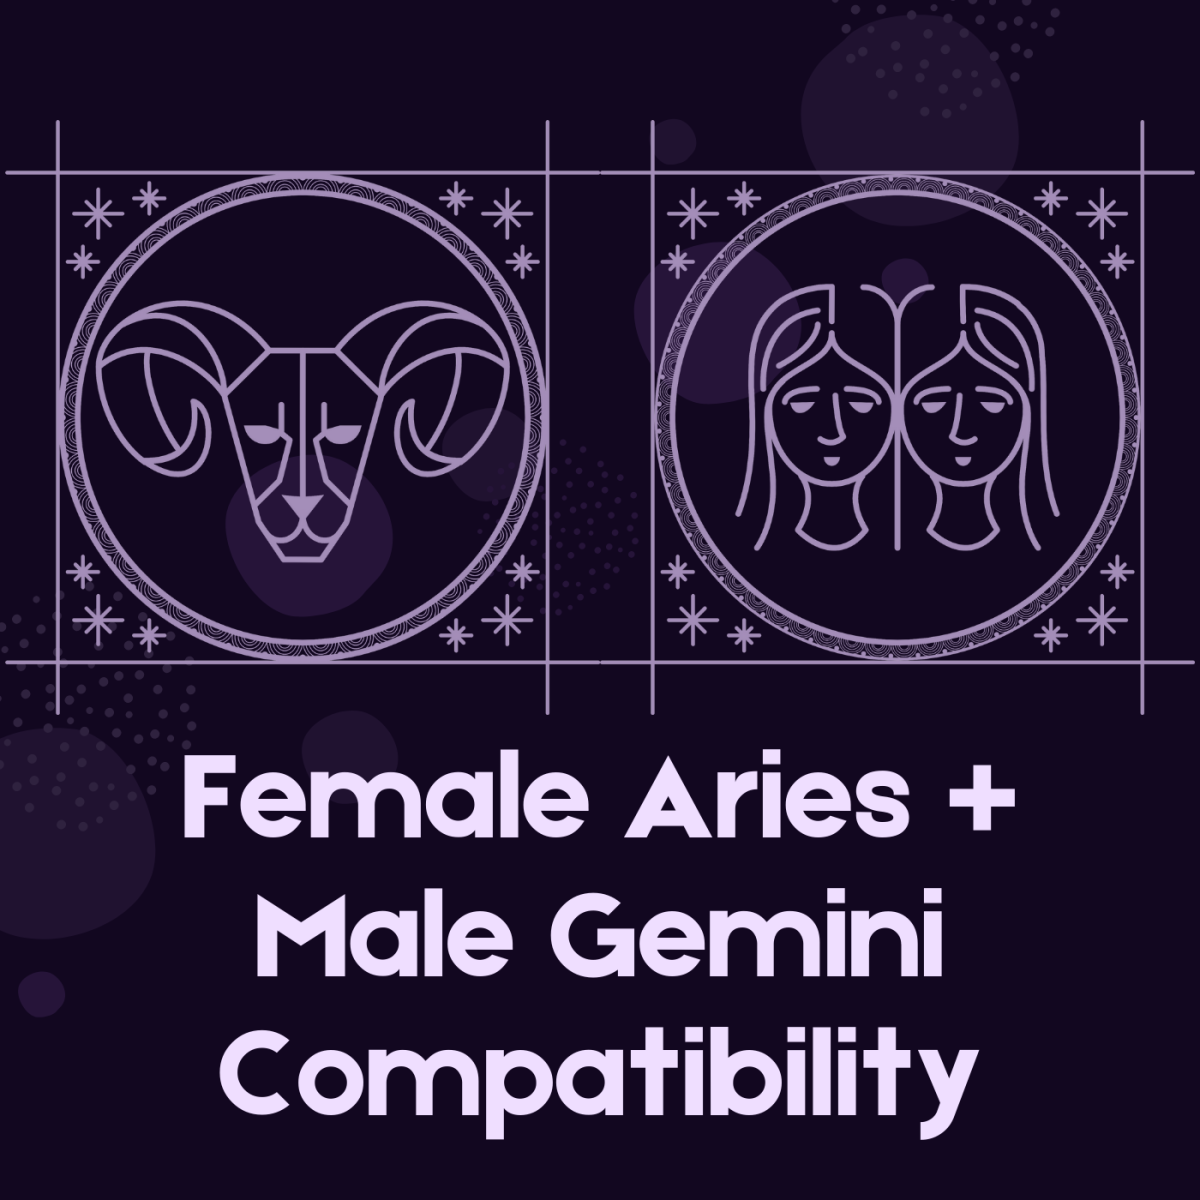 Discover what Aries and Gemini are like in a relationship. Can the ram and the twins find love?